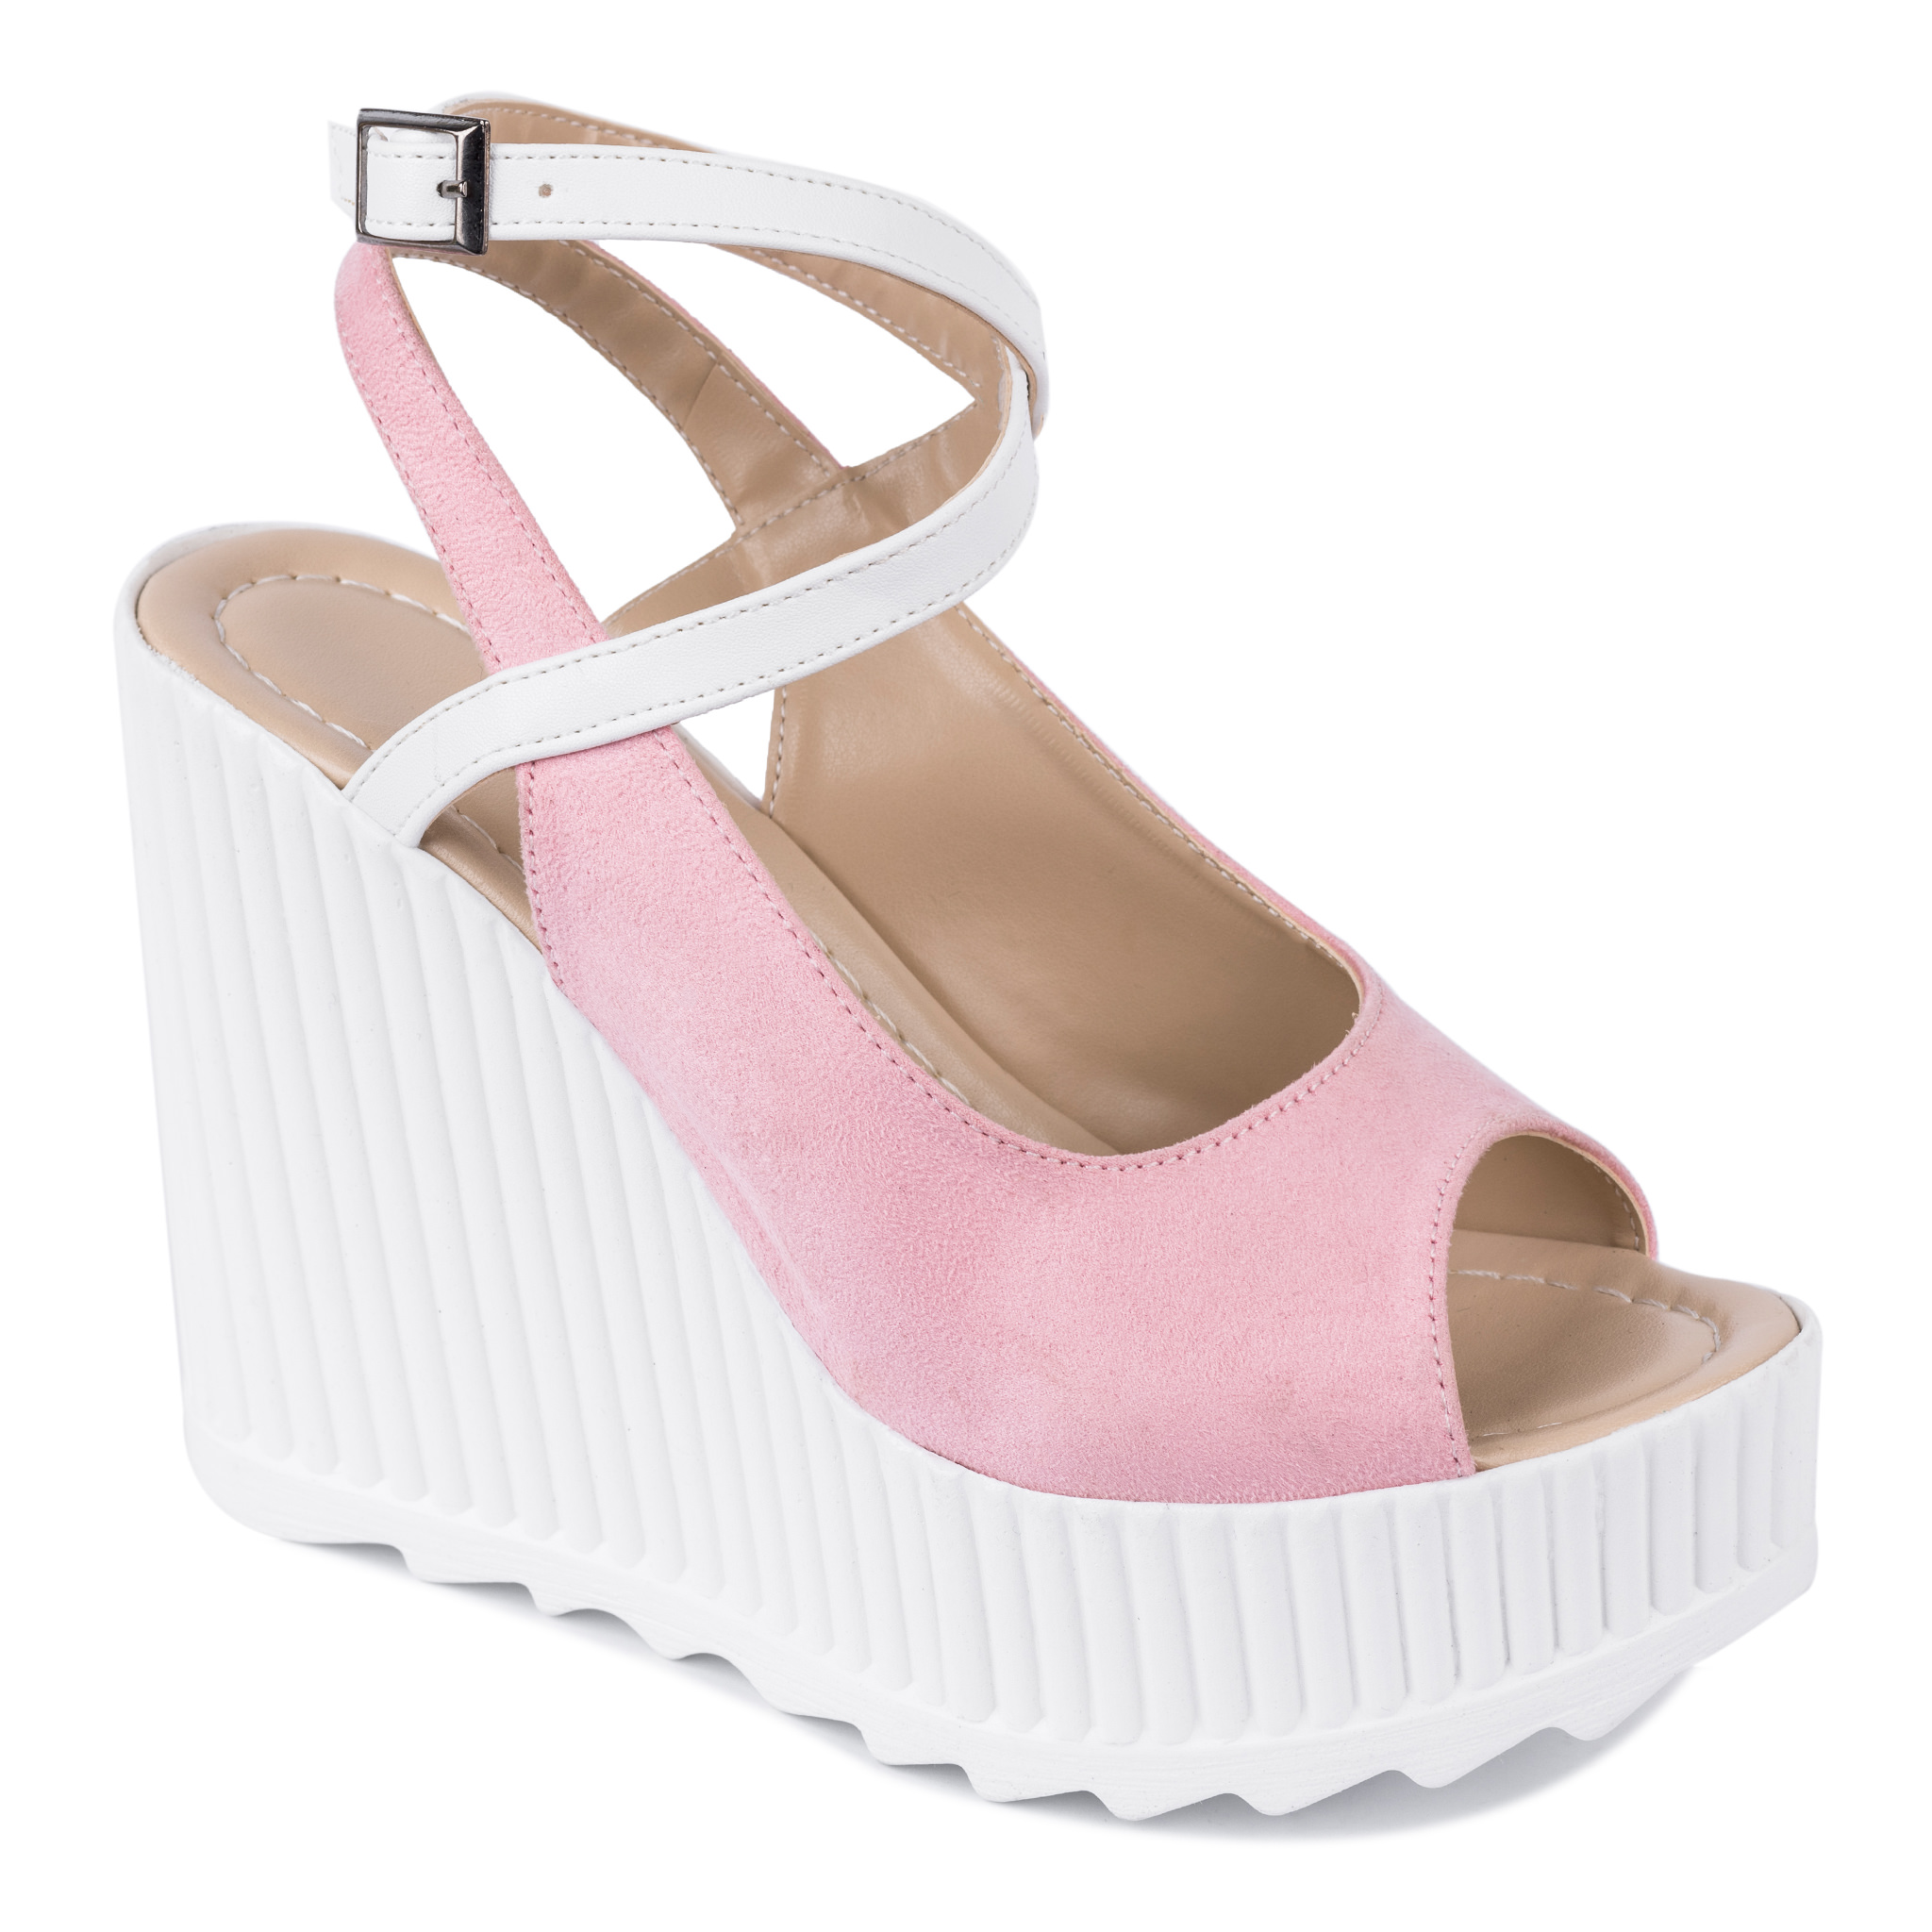 VELOUR PEEP TOE WEDGE SANDALS WITH BELTS - ROSE